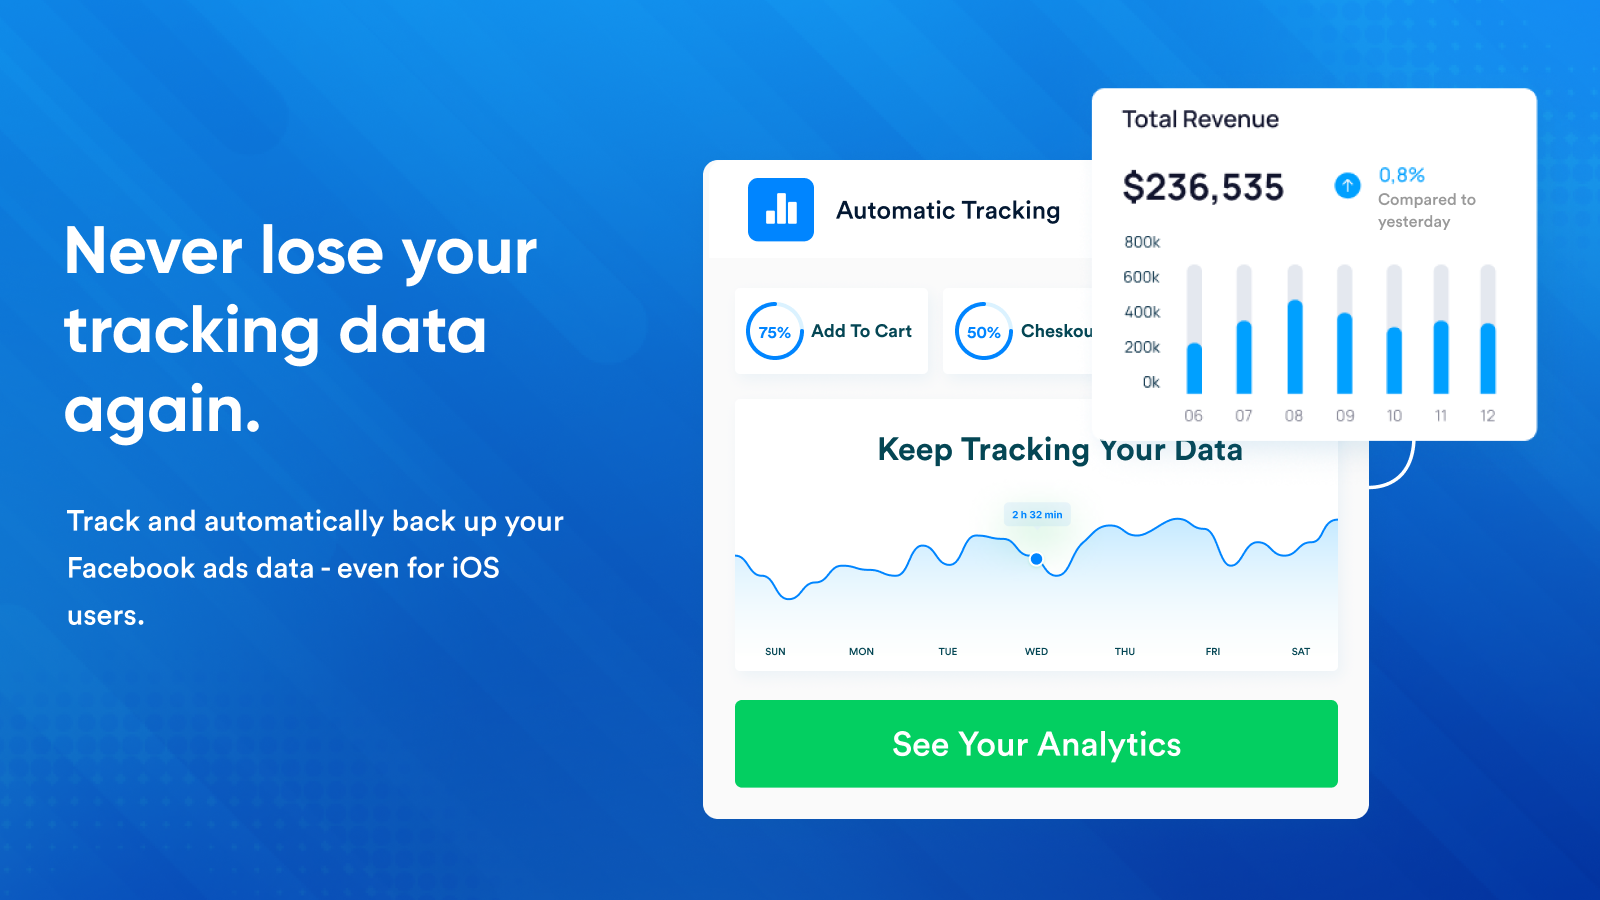 Keep your tracking data safe - automatically